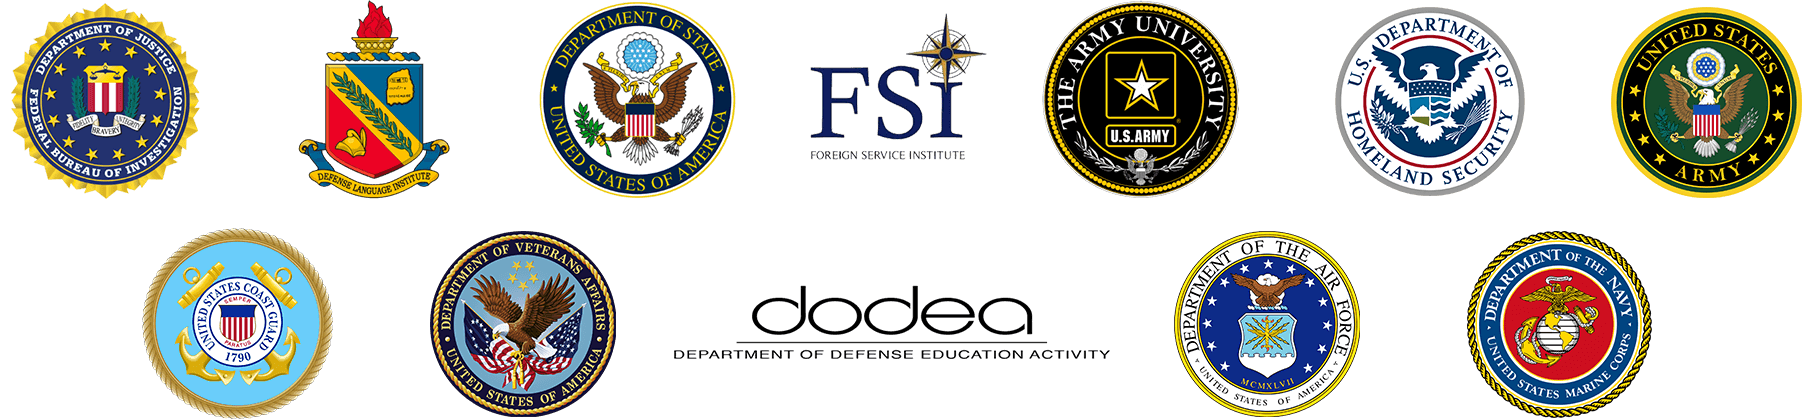 A collection of official seals from U.S. government agencies and military branches, indicating their trust in SMART technology for enhancing productivity and efficiency.